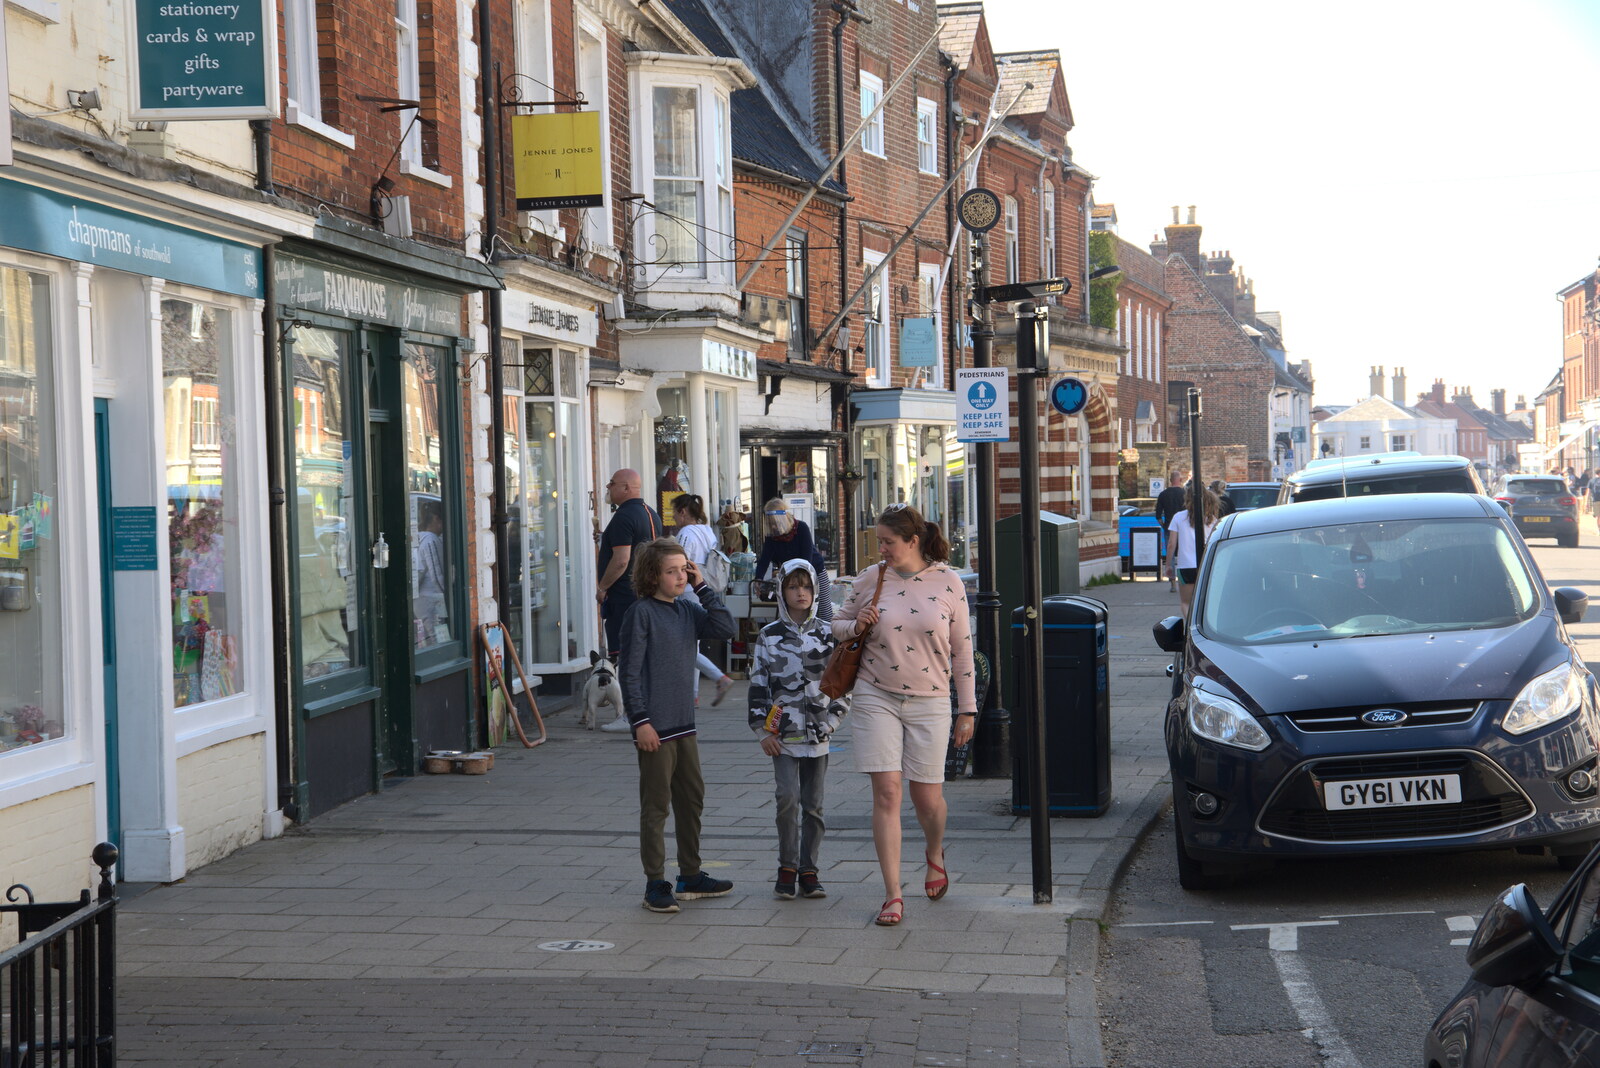 Fred, Harry and Isobel on the High Street from A Day at the Beach with Sis, Southwold, Suffolk - 31st May 2021